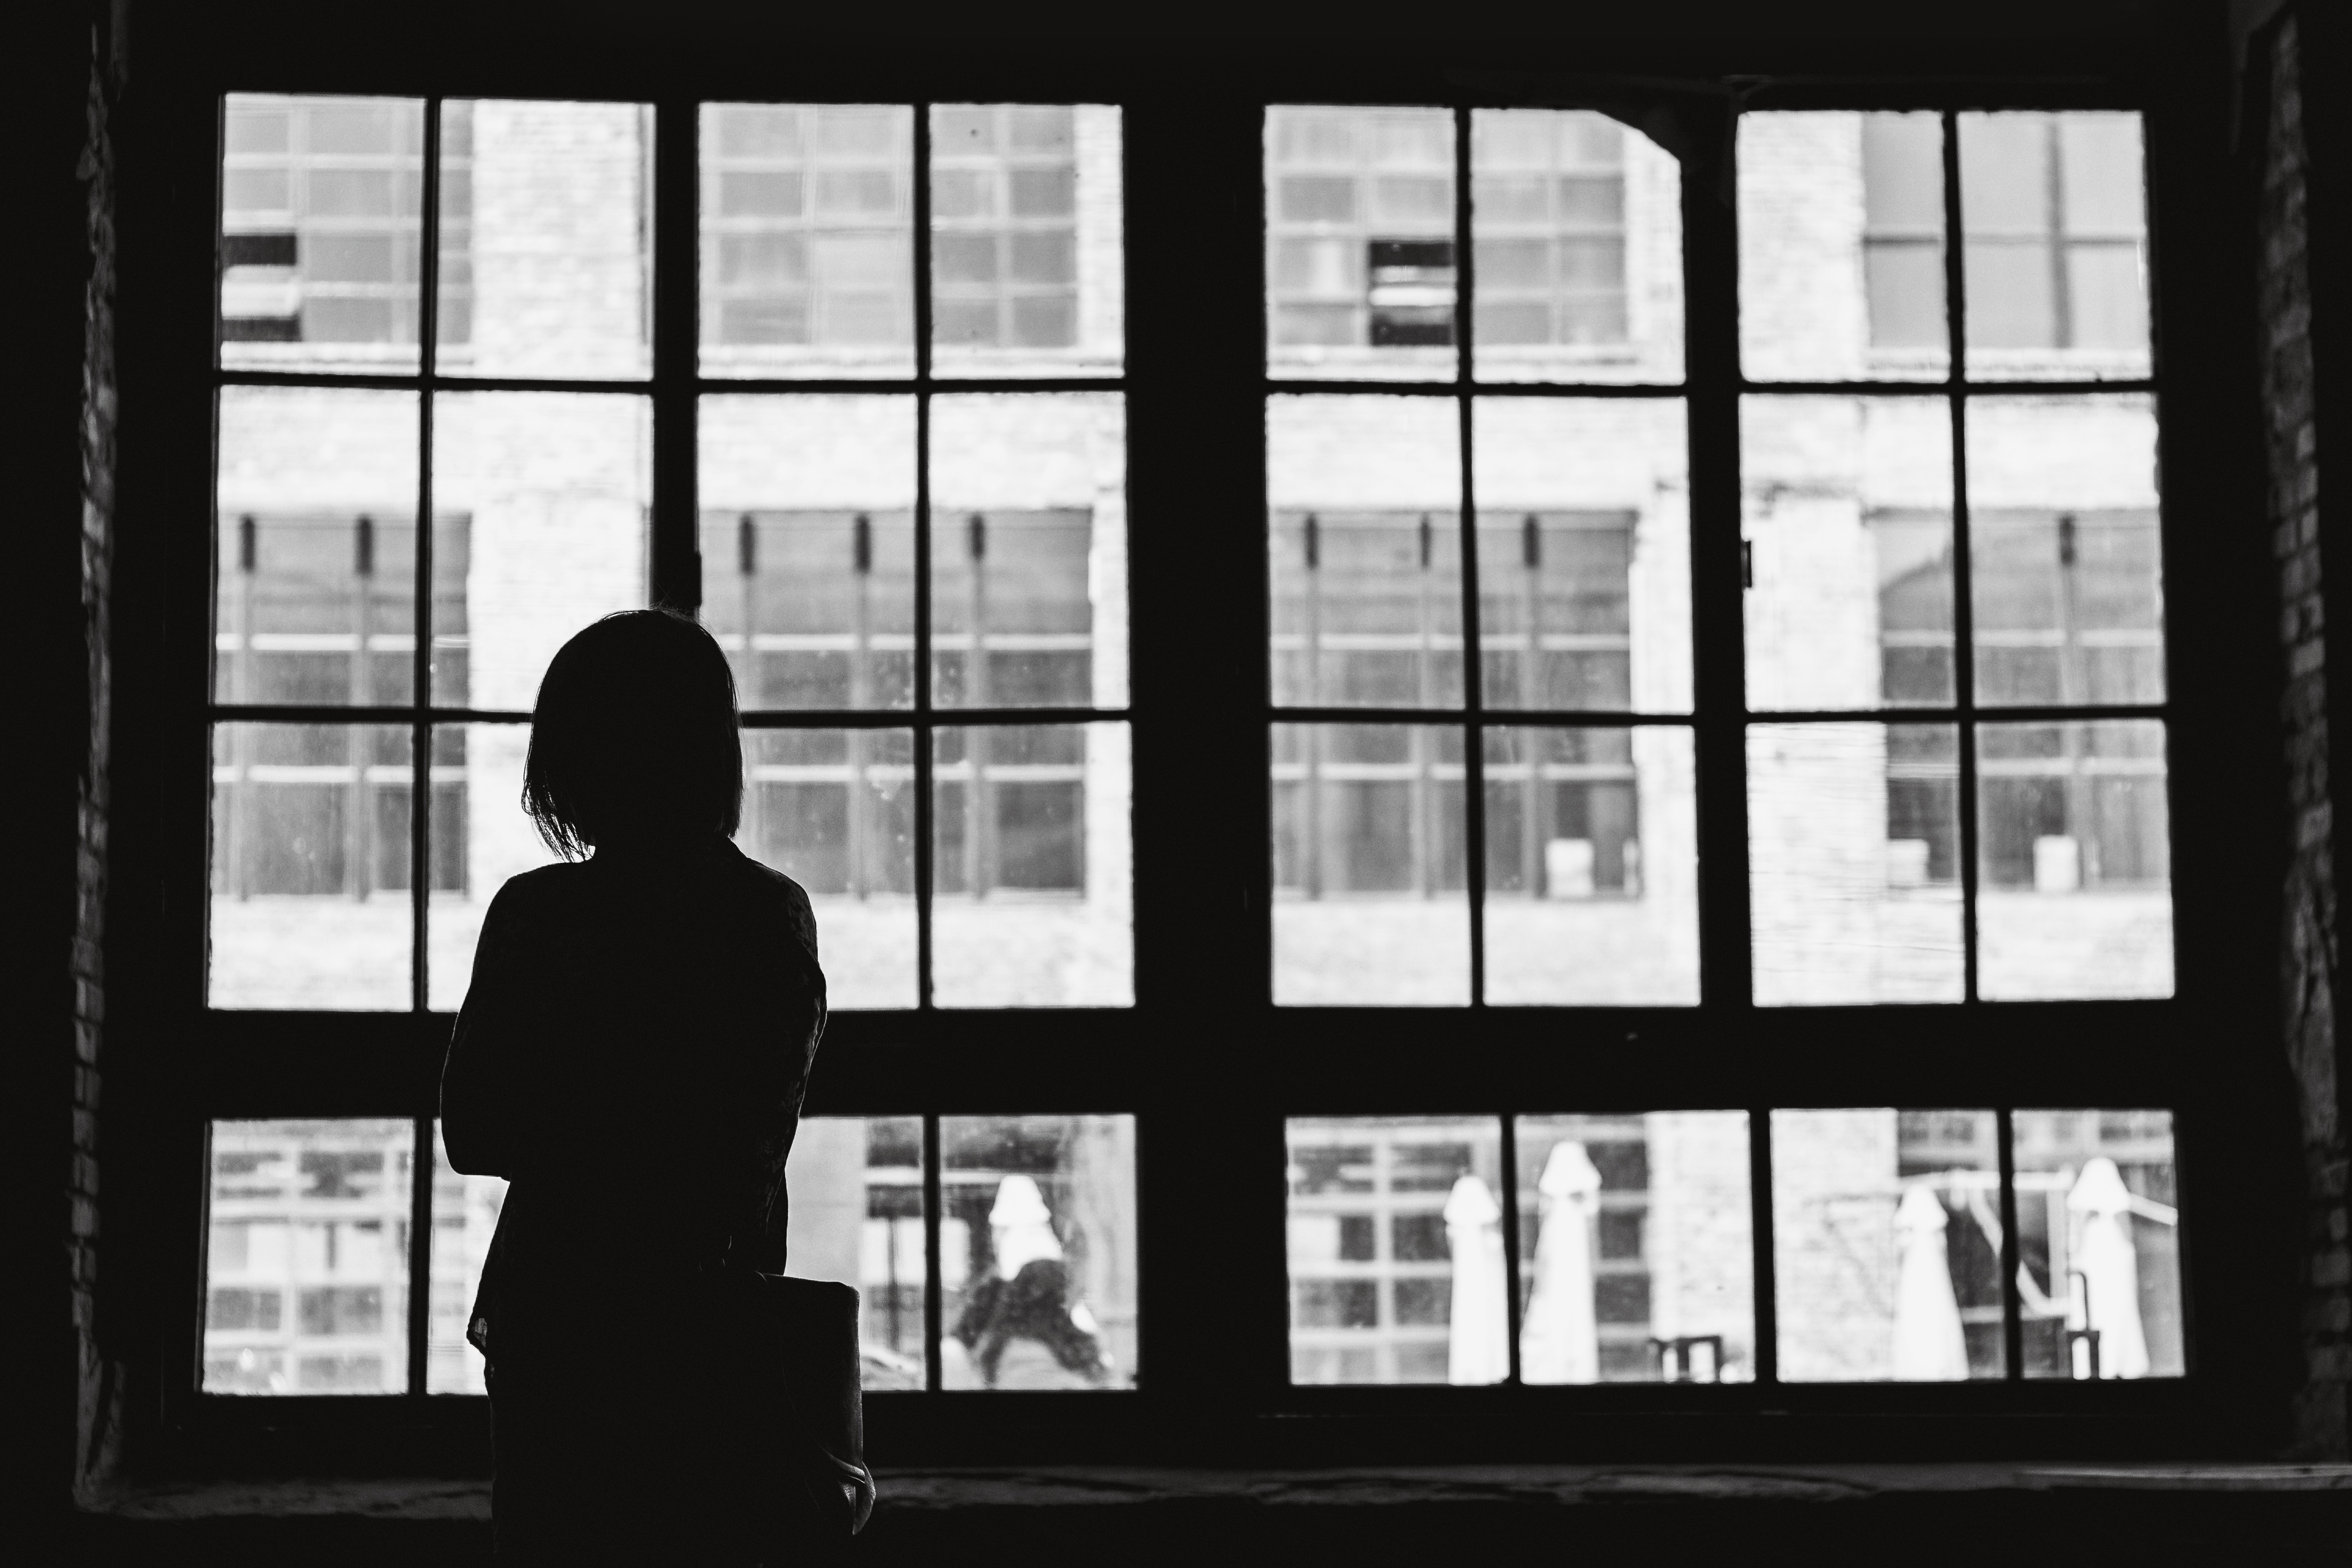 Silhouette of a person looking out of a window